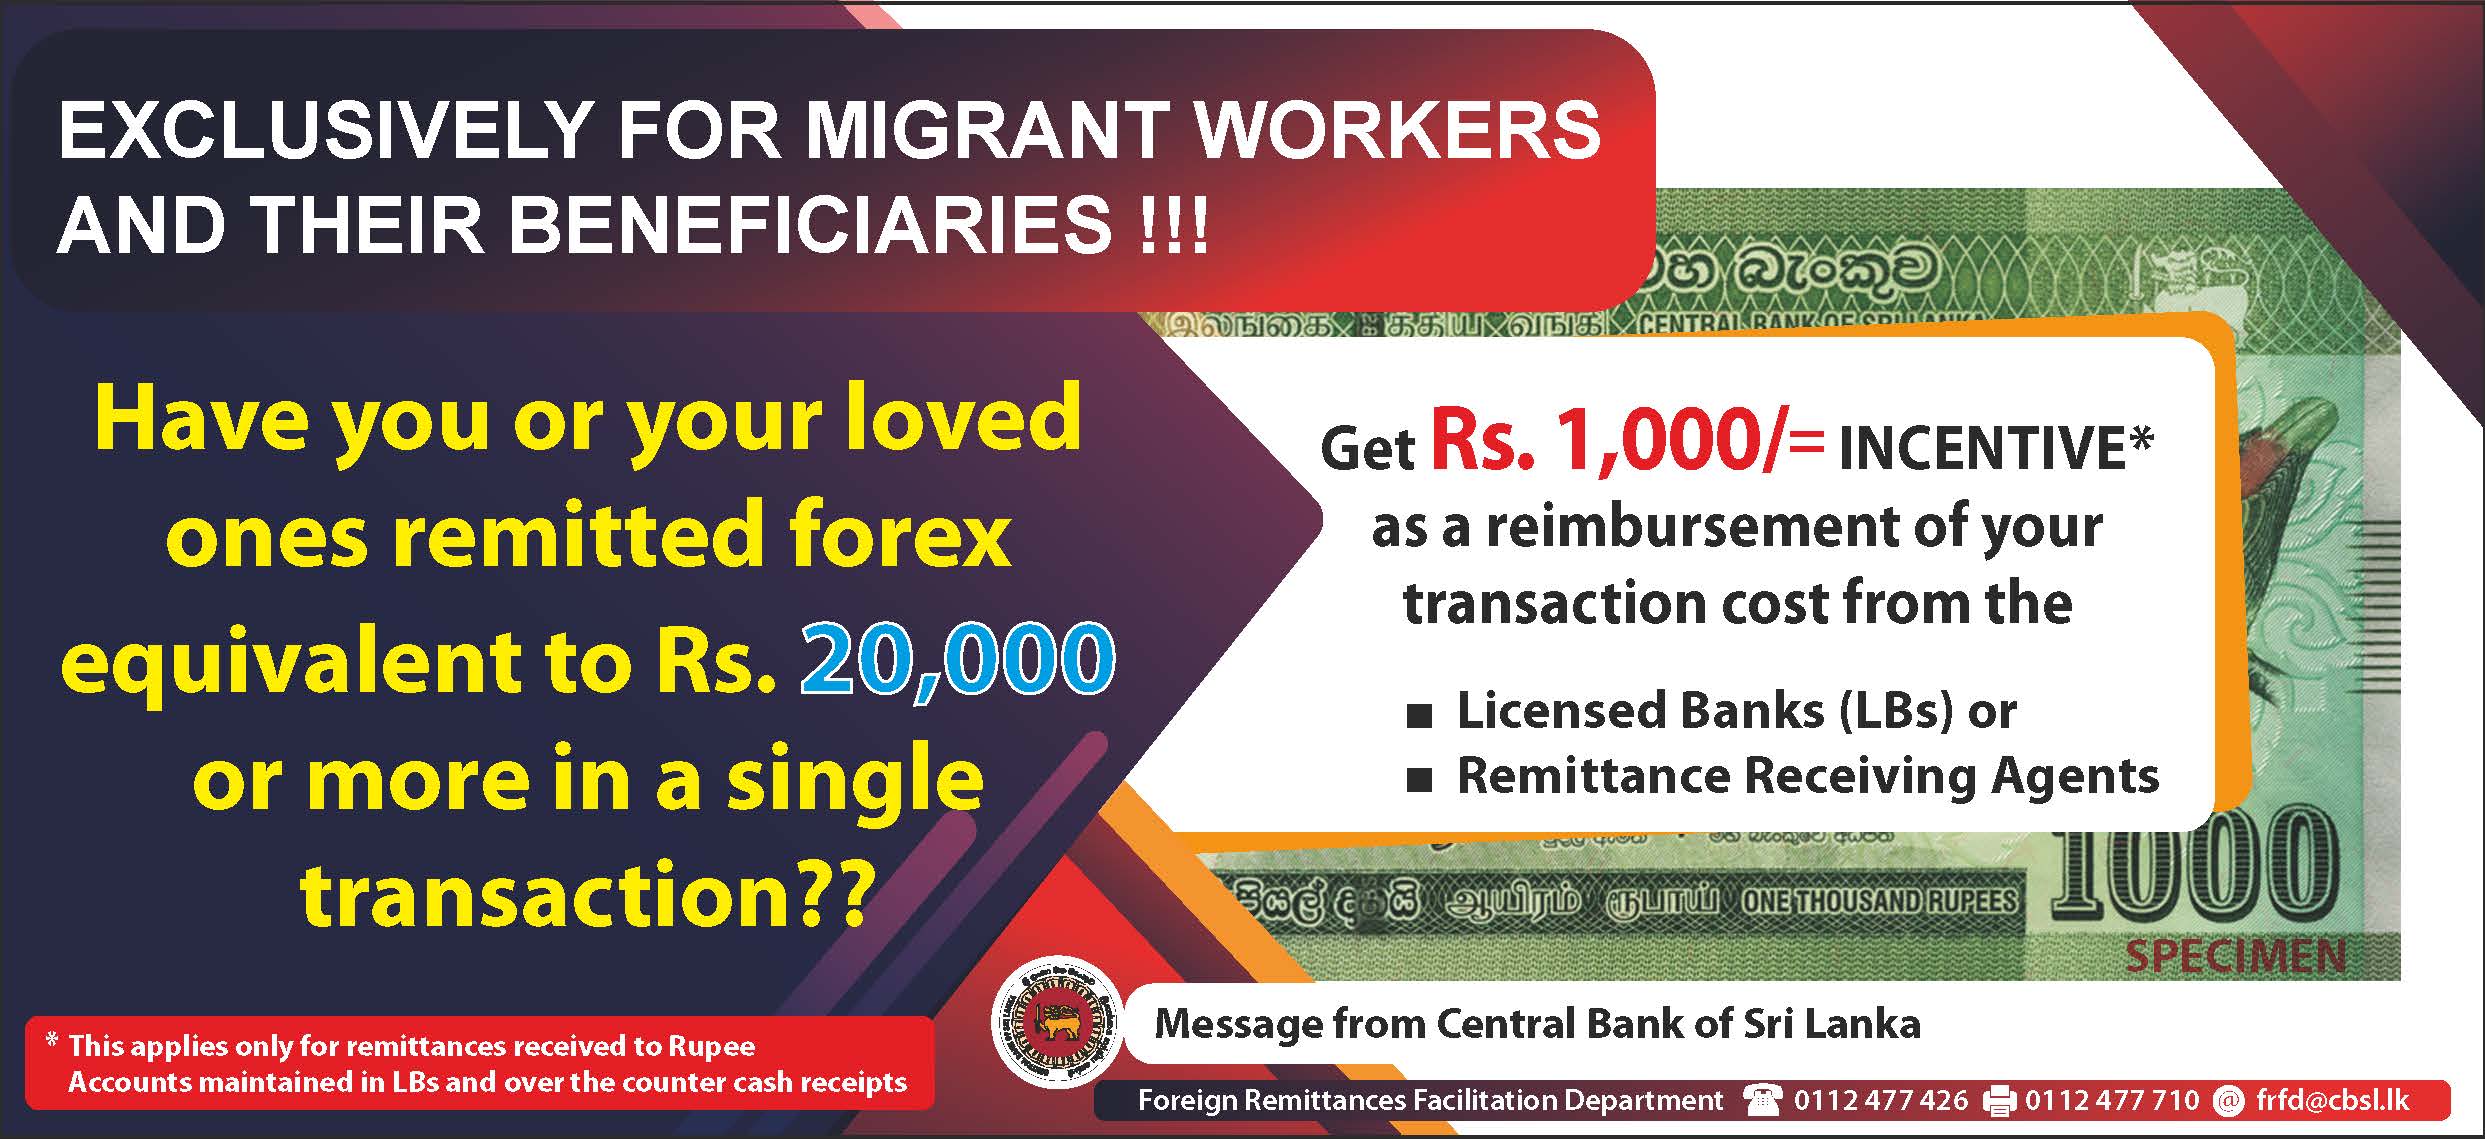 Will the new incentive for foreign remittance work?